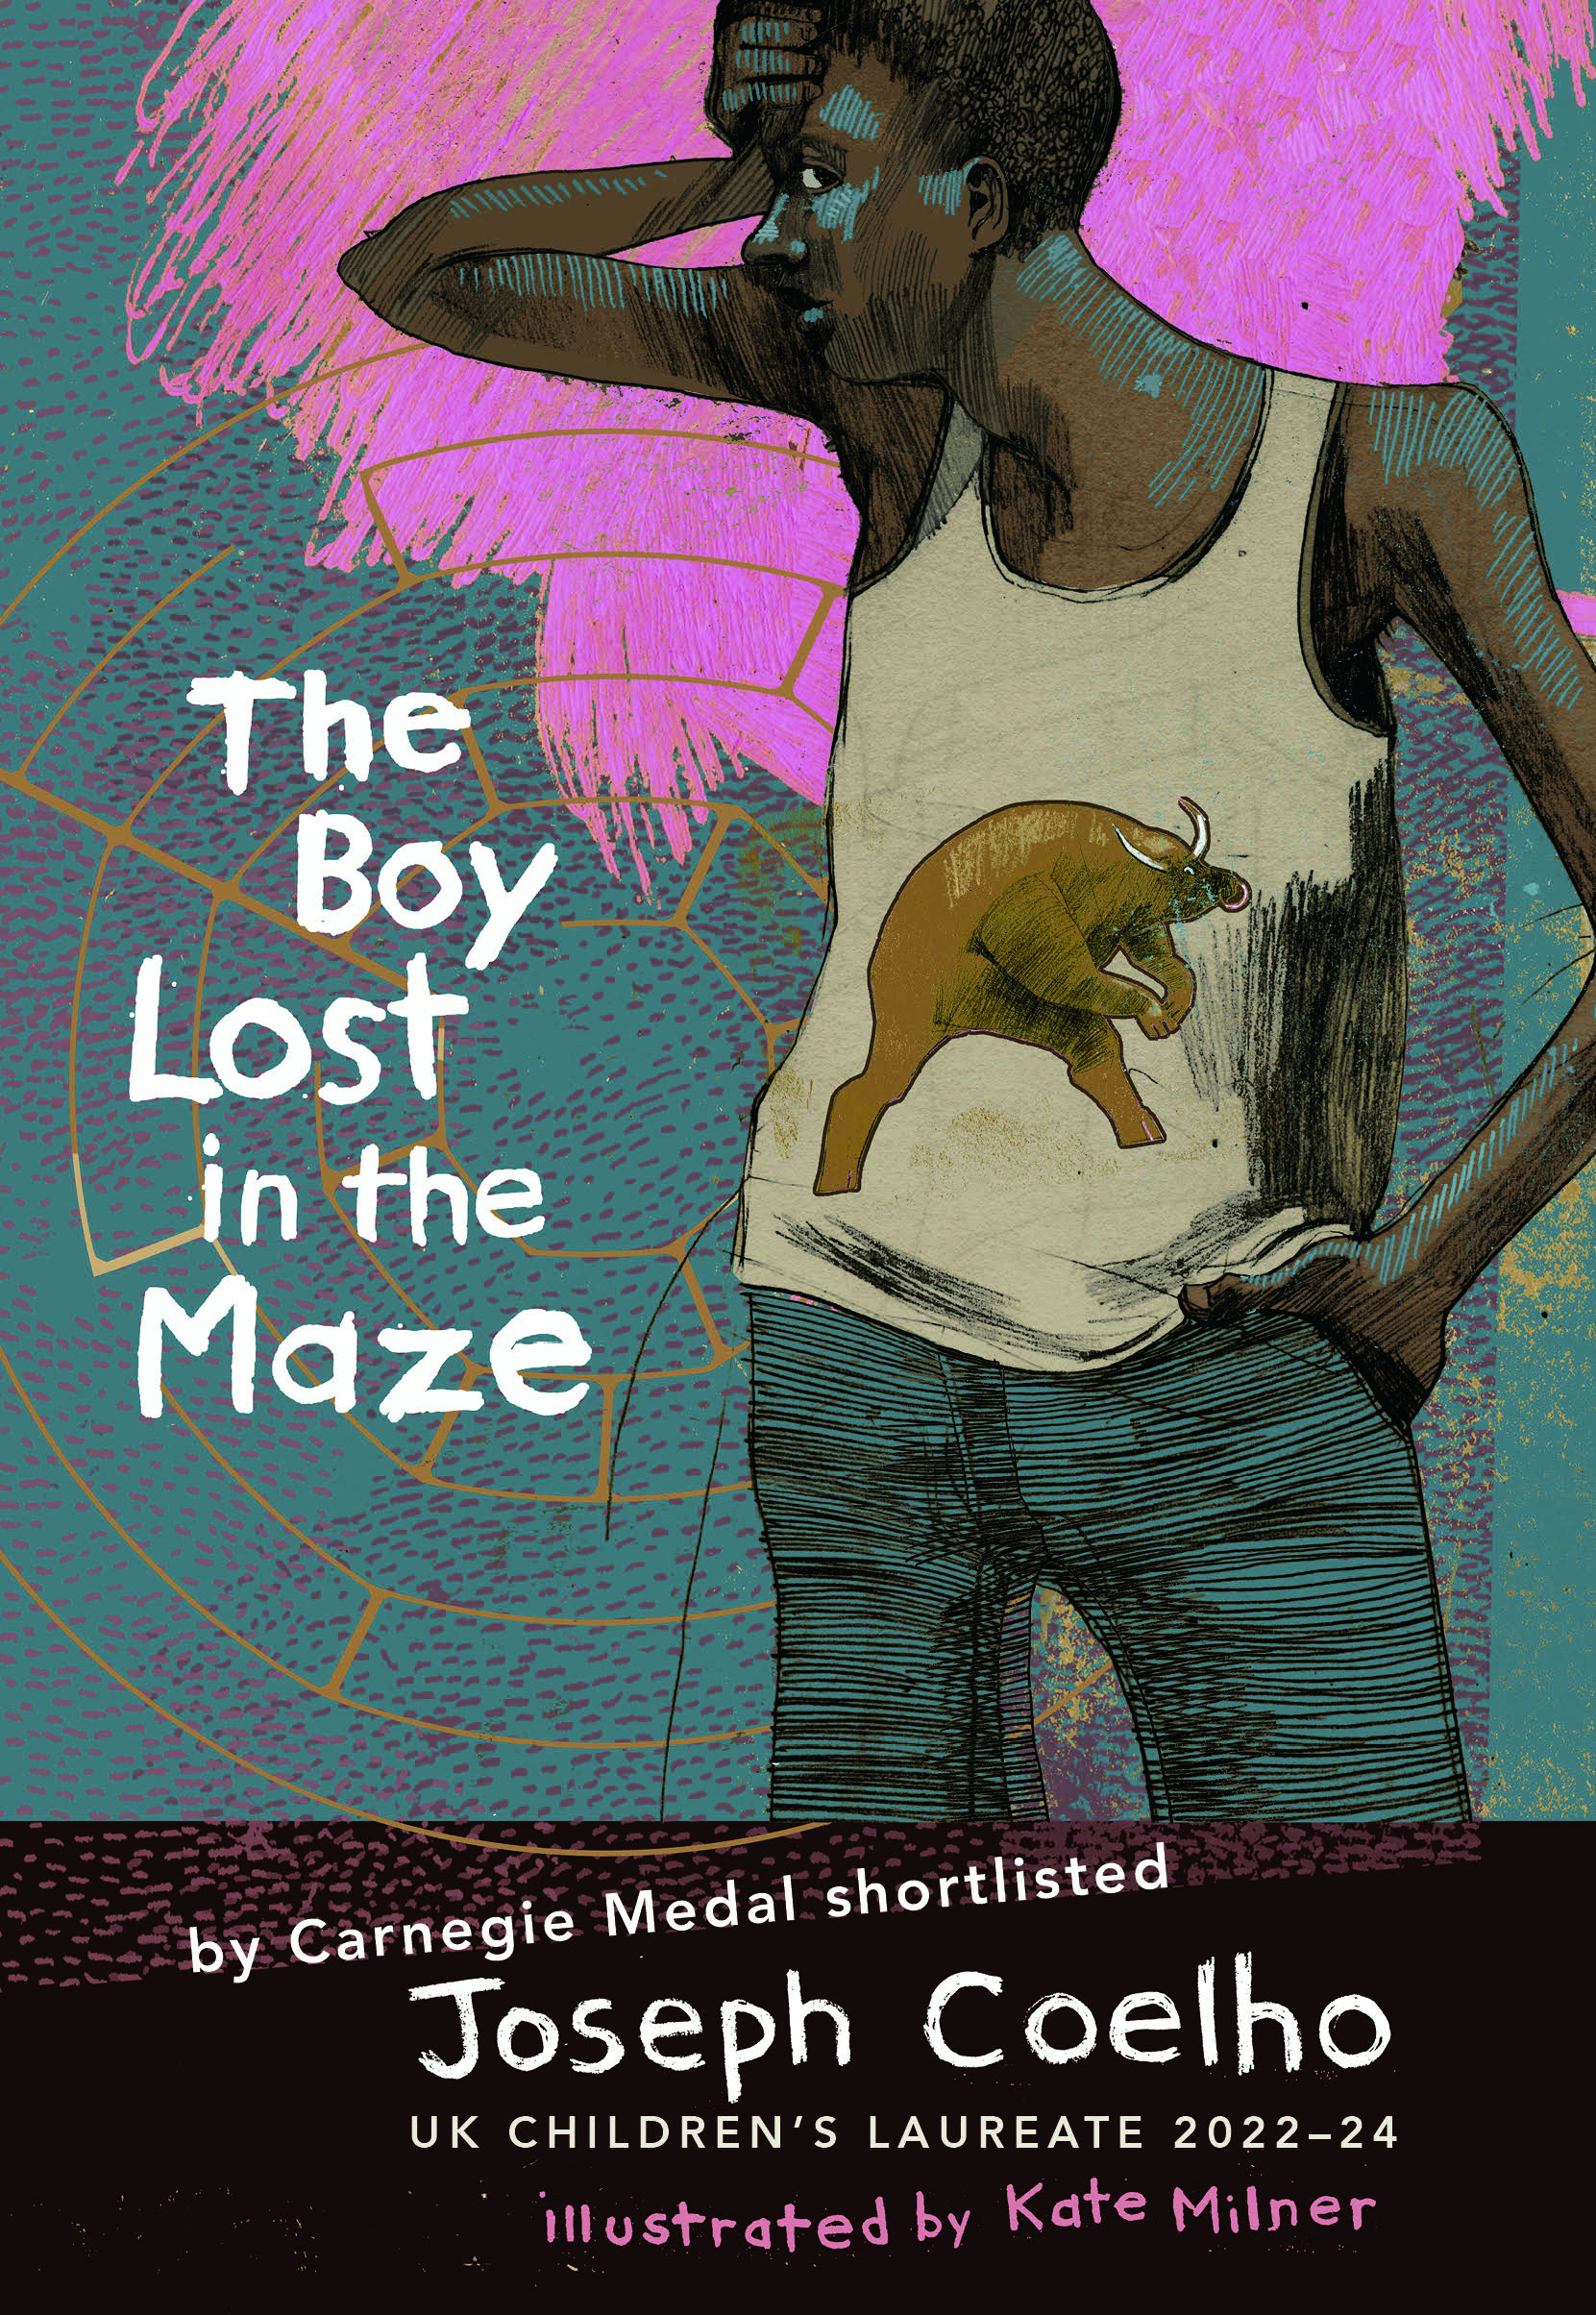 The Boy Lost In The Maze by Joseph Coelho